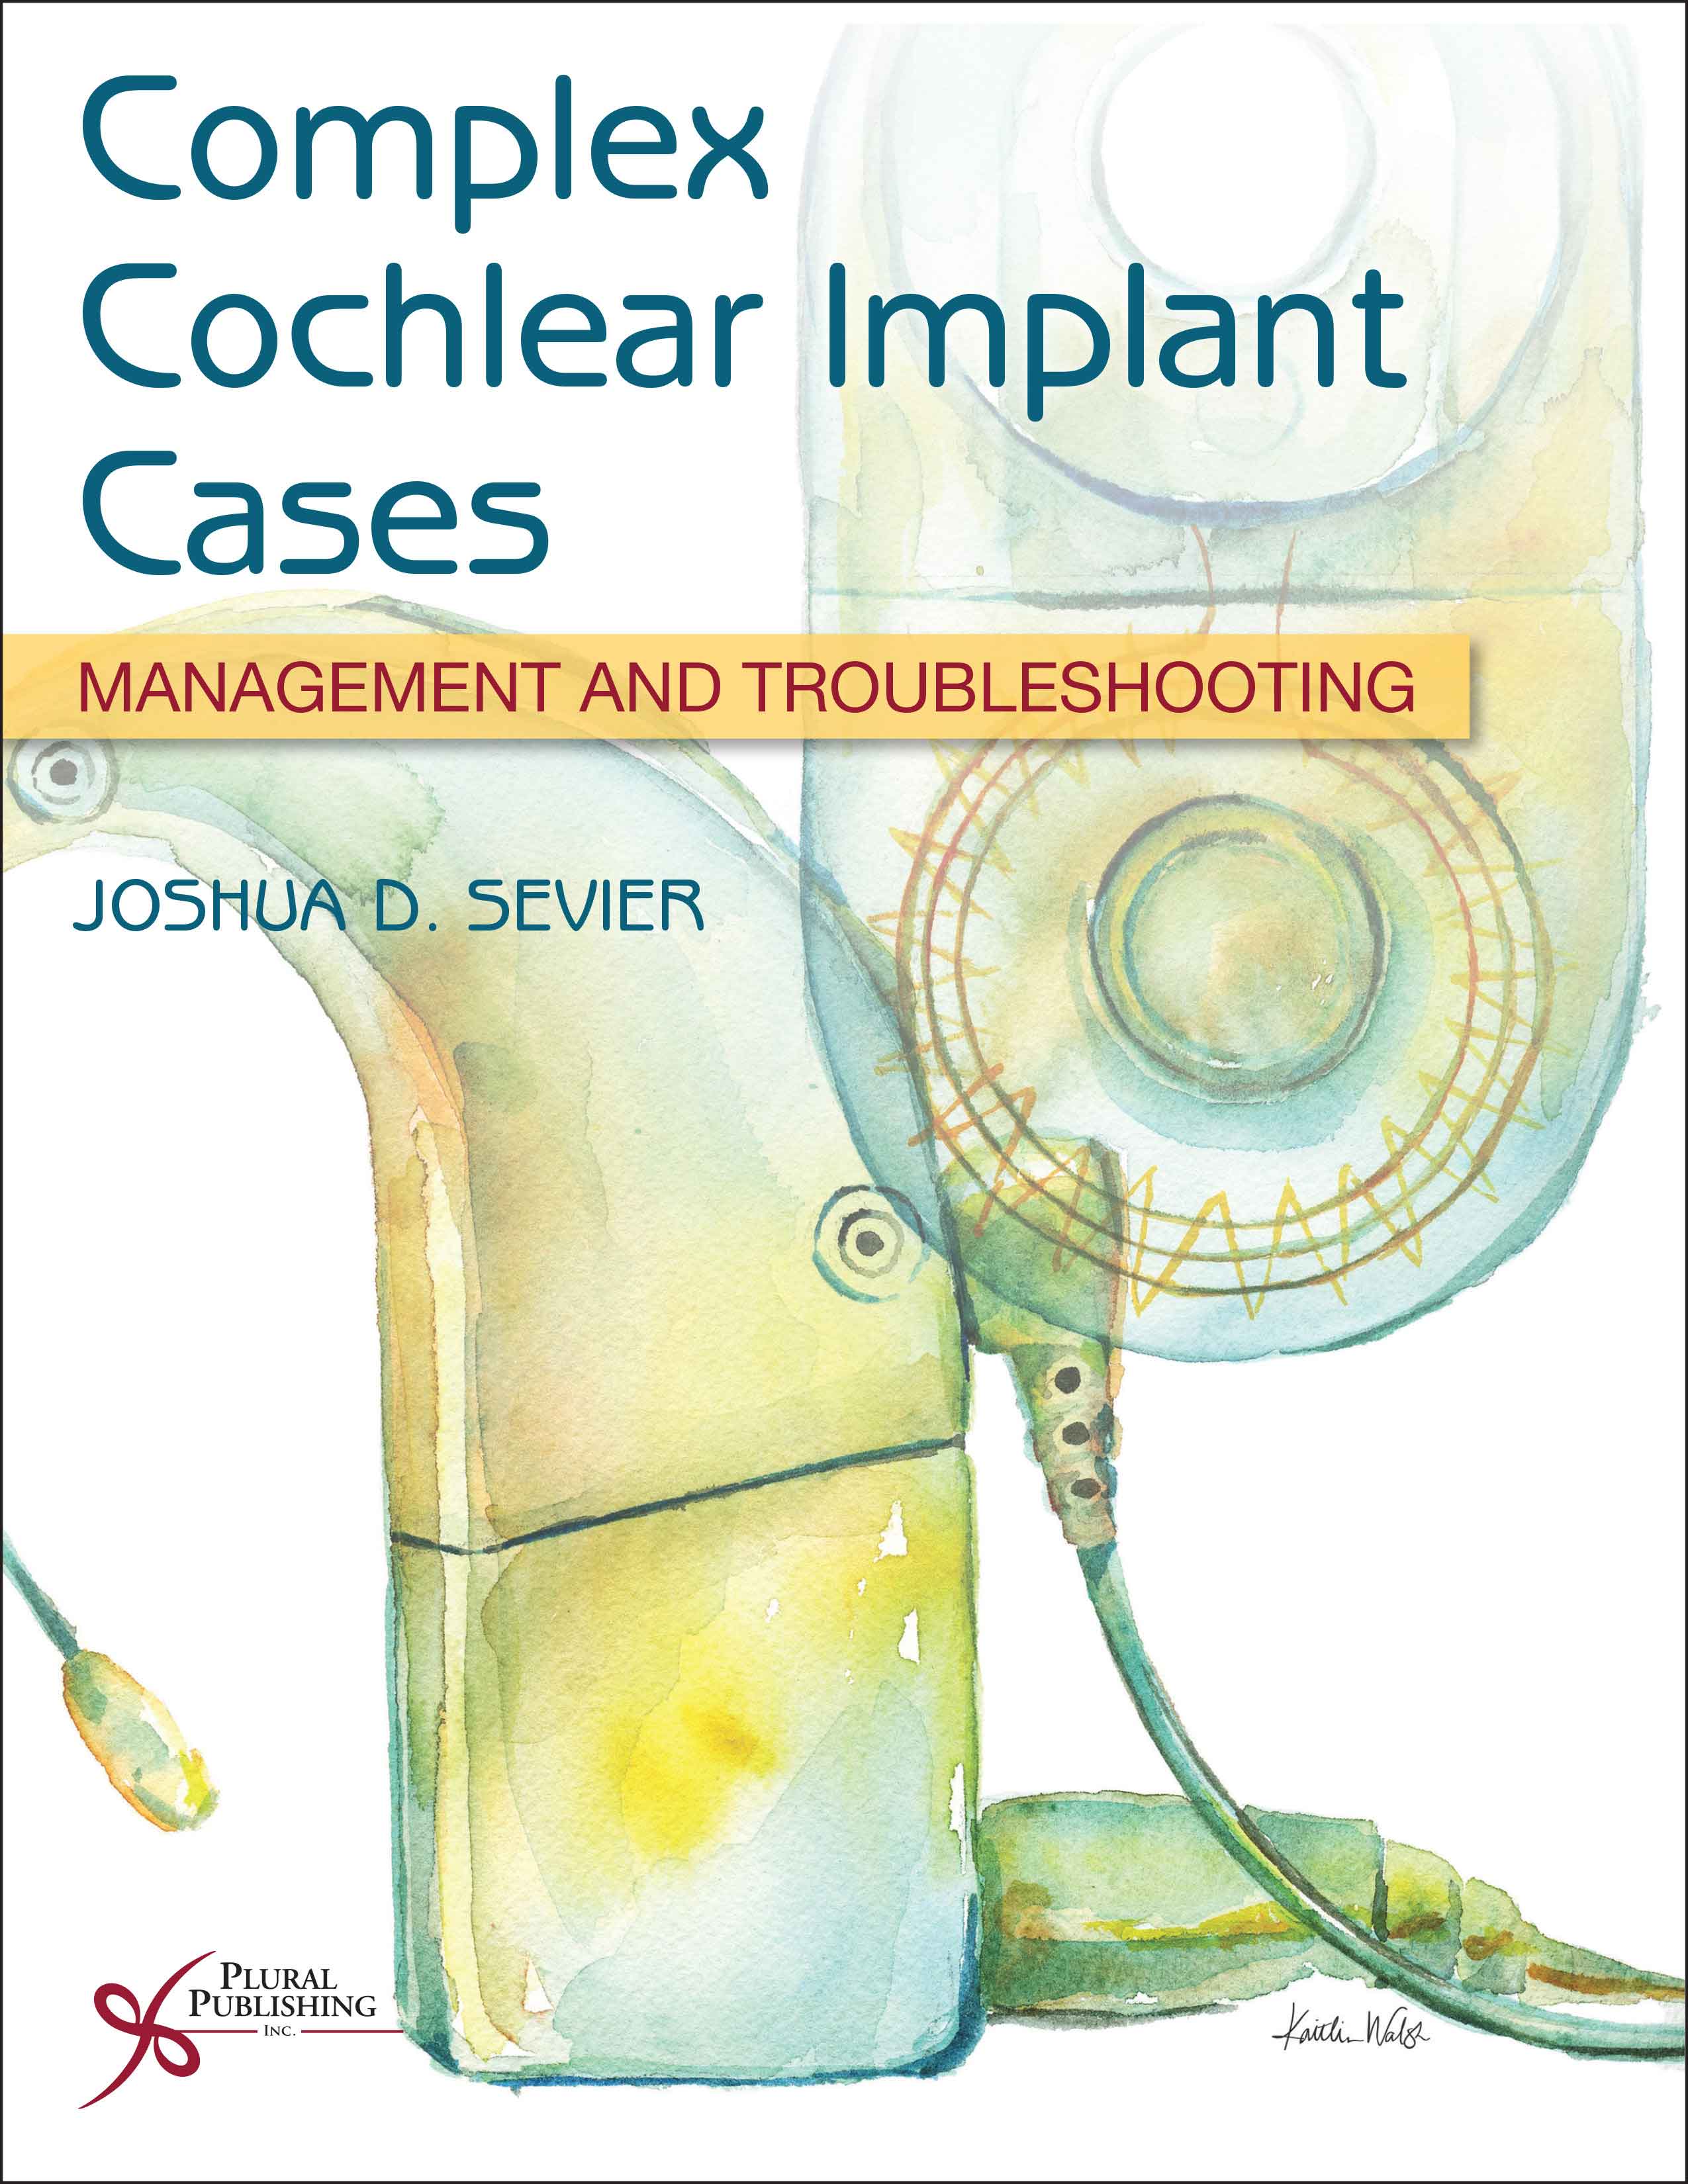 Complex Cochlear Implant Cases: Management and Troubleshooting